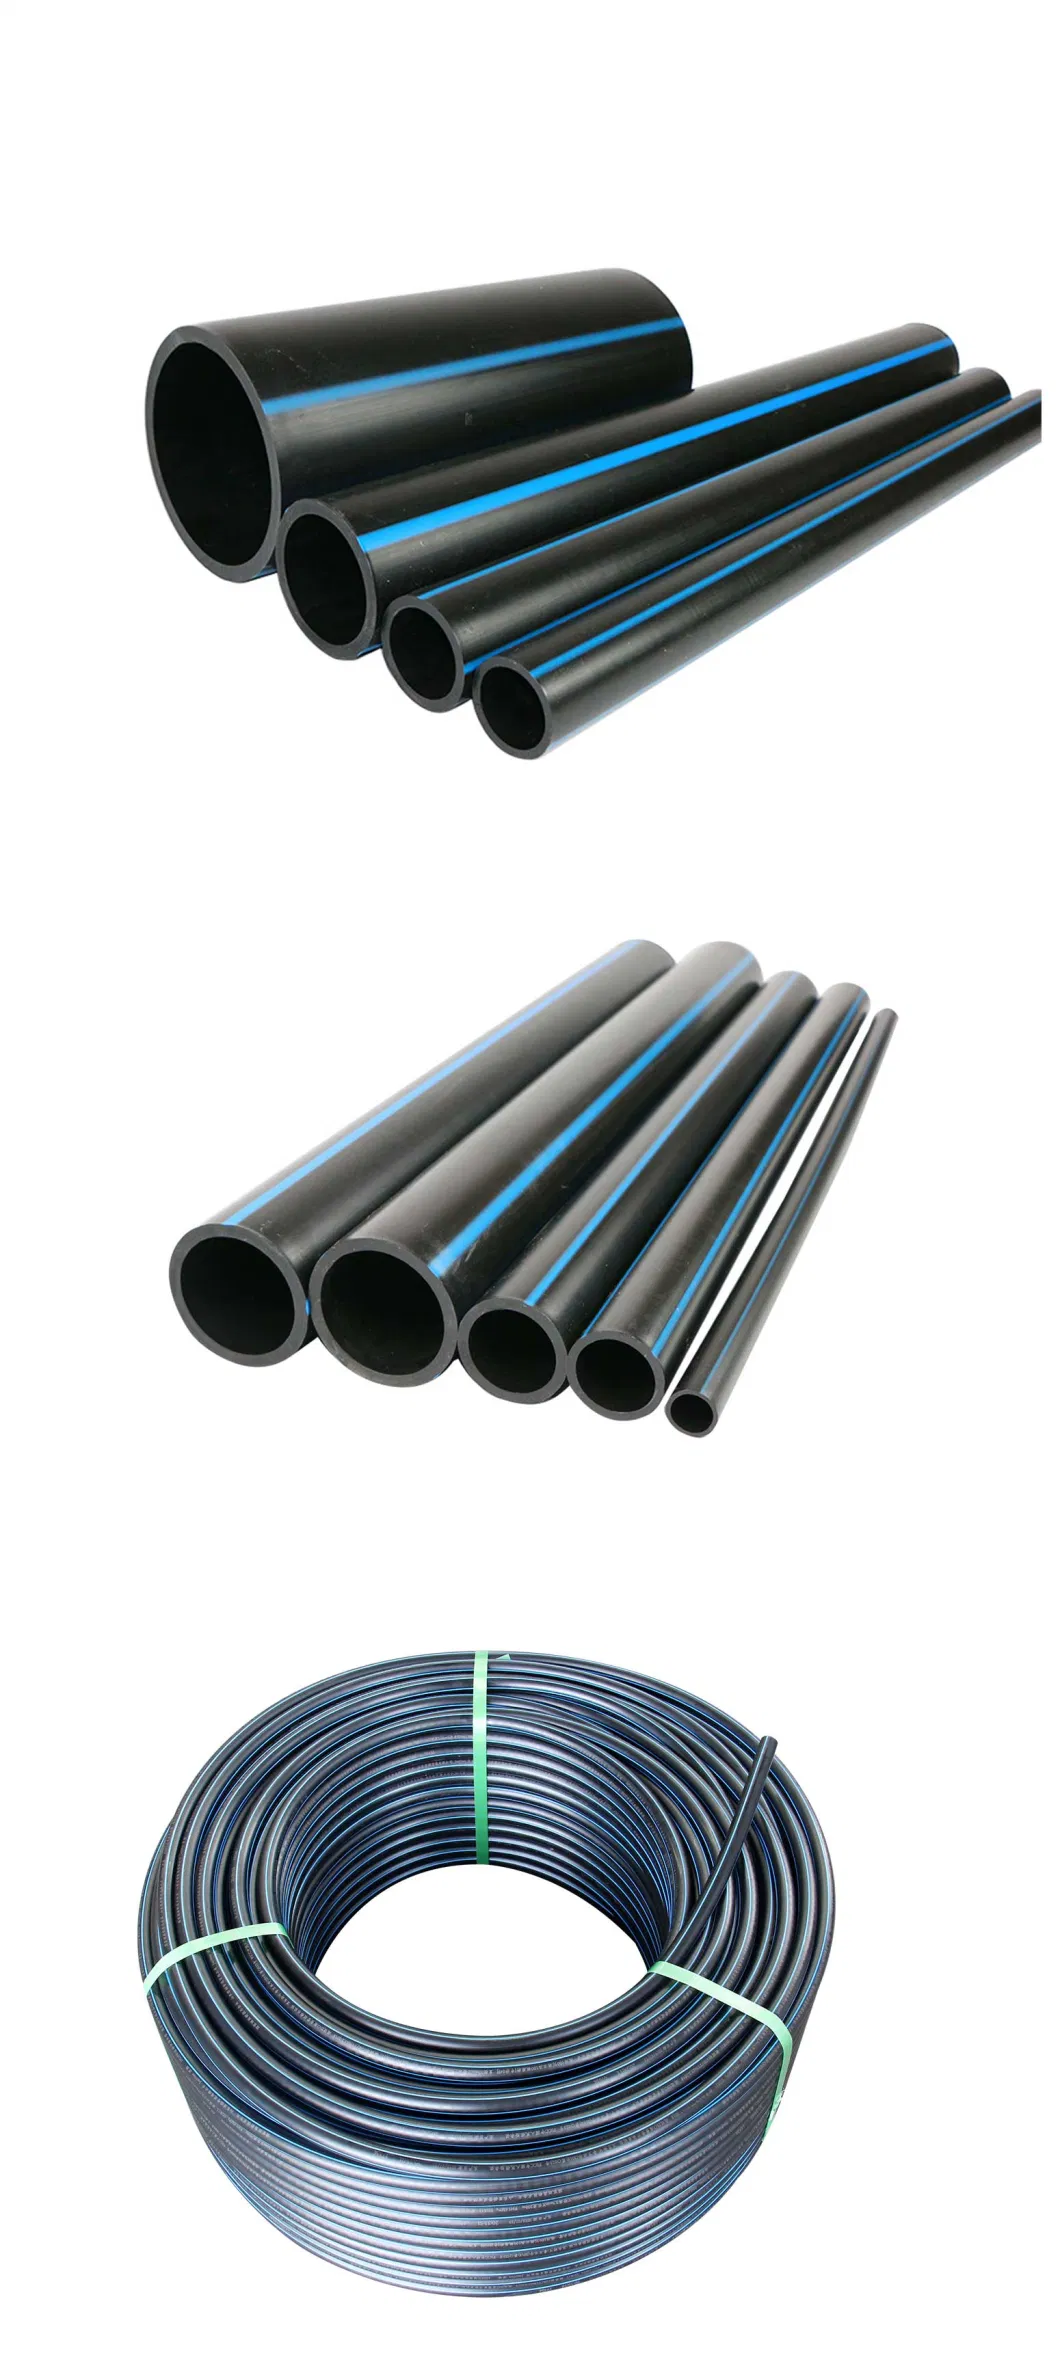 Chemical Corrosion Resistance Lead Free HDPE Pipe for Water Supply Agricultural Irrigation System Green House